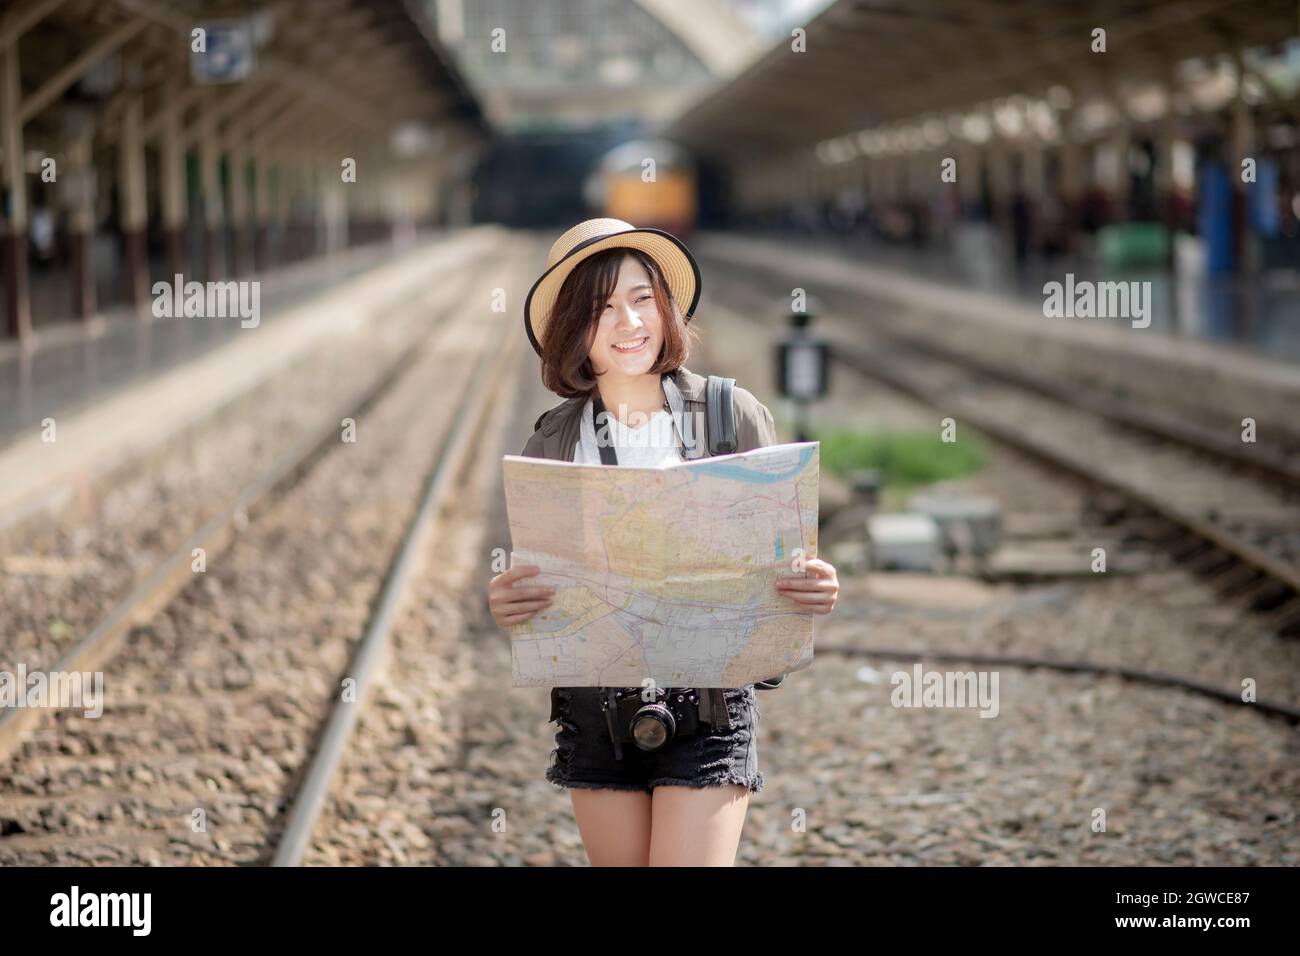 Female Tourist Holding Map While Standing On Railroad Track Stock Photo